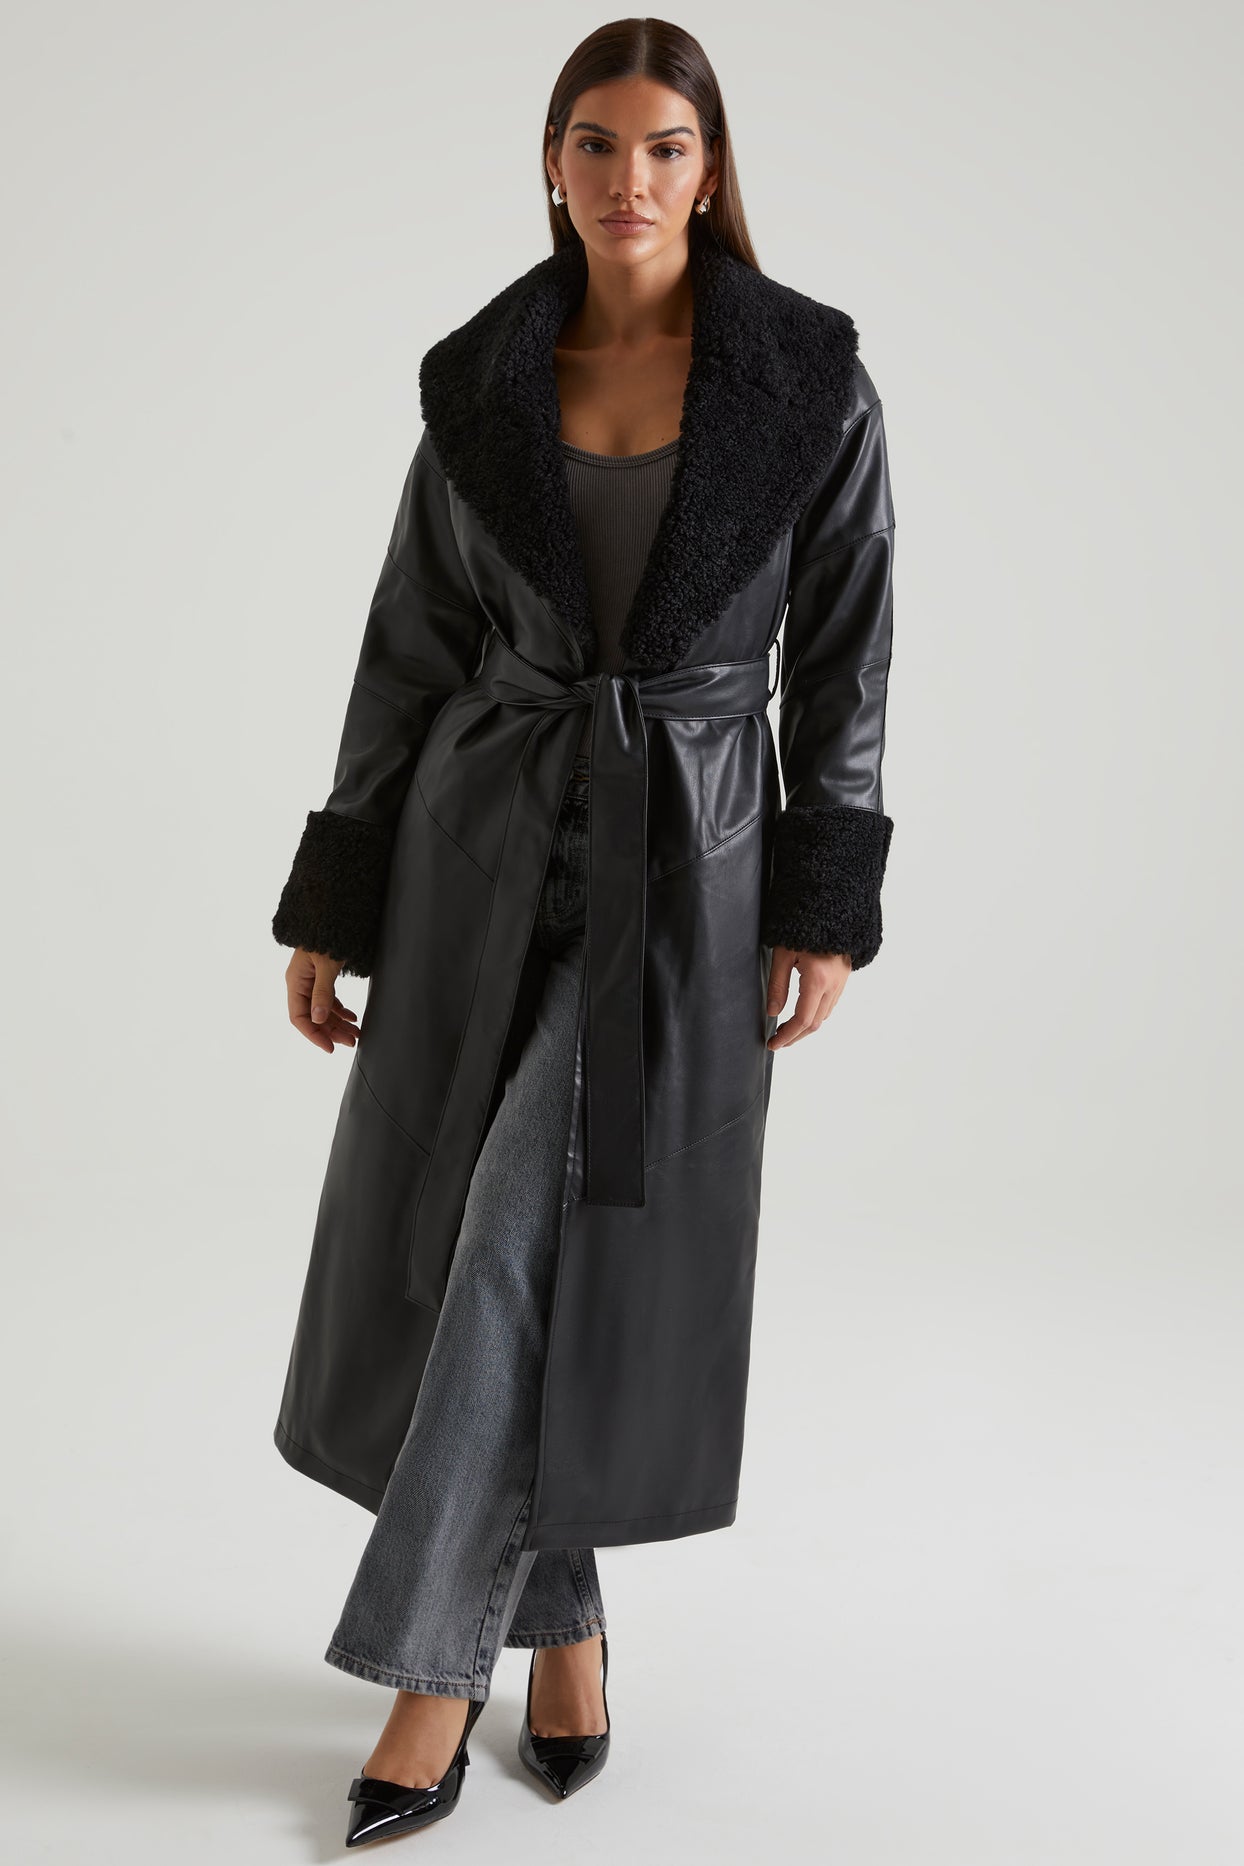 Lumi Tie Up Coat with Shearling Collar and Cuff in Black | Oh Polly